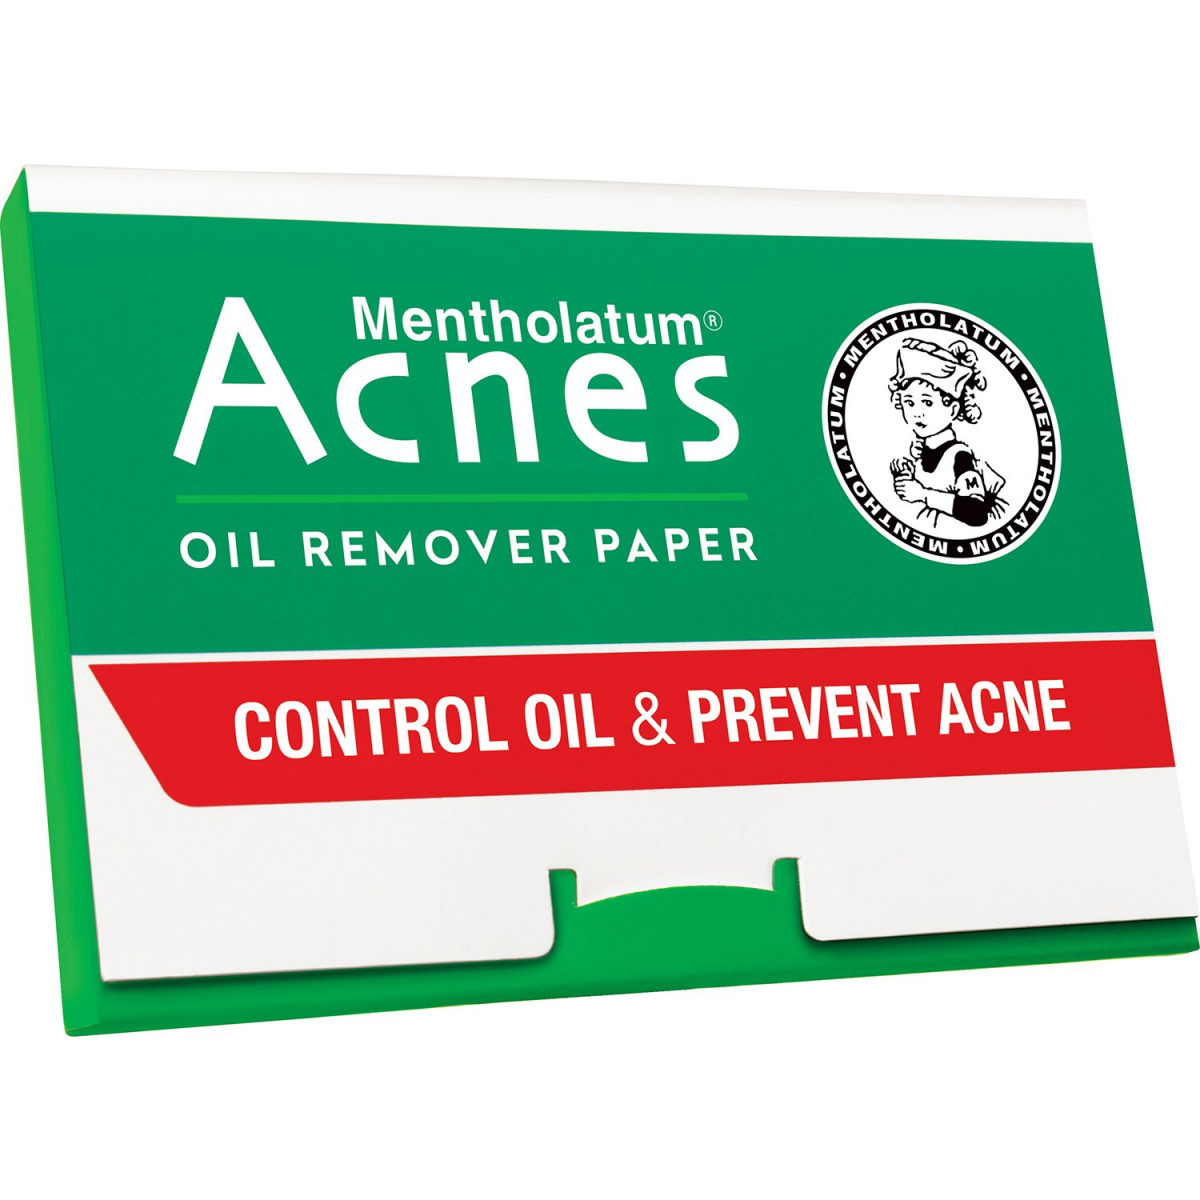 Giấy Thấm Dầu Acnes – Acnes Oil Remover Paper